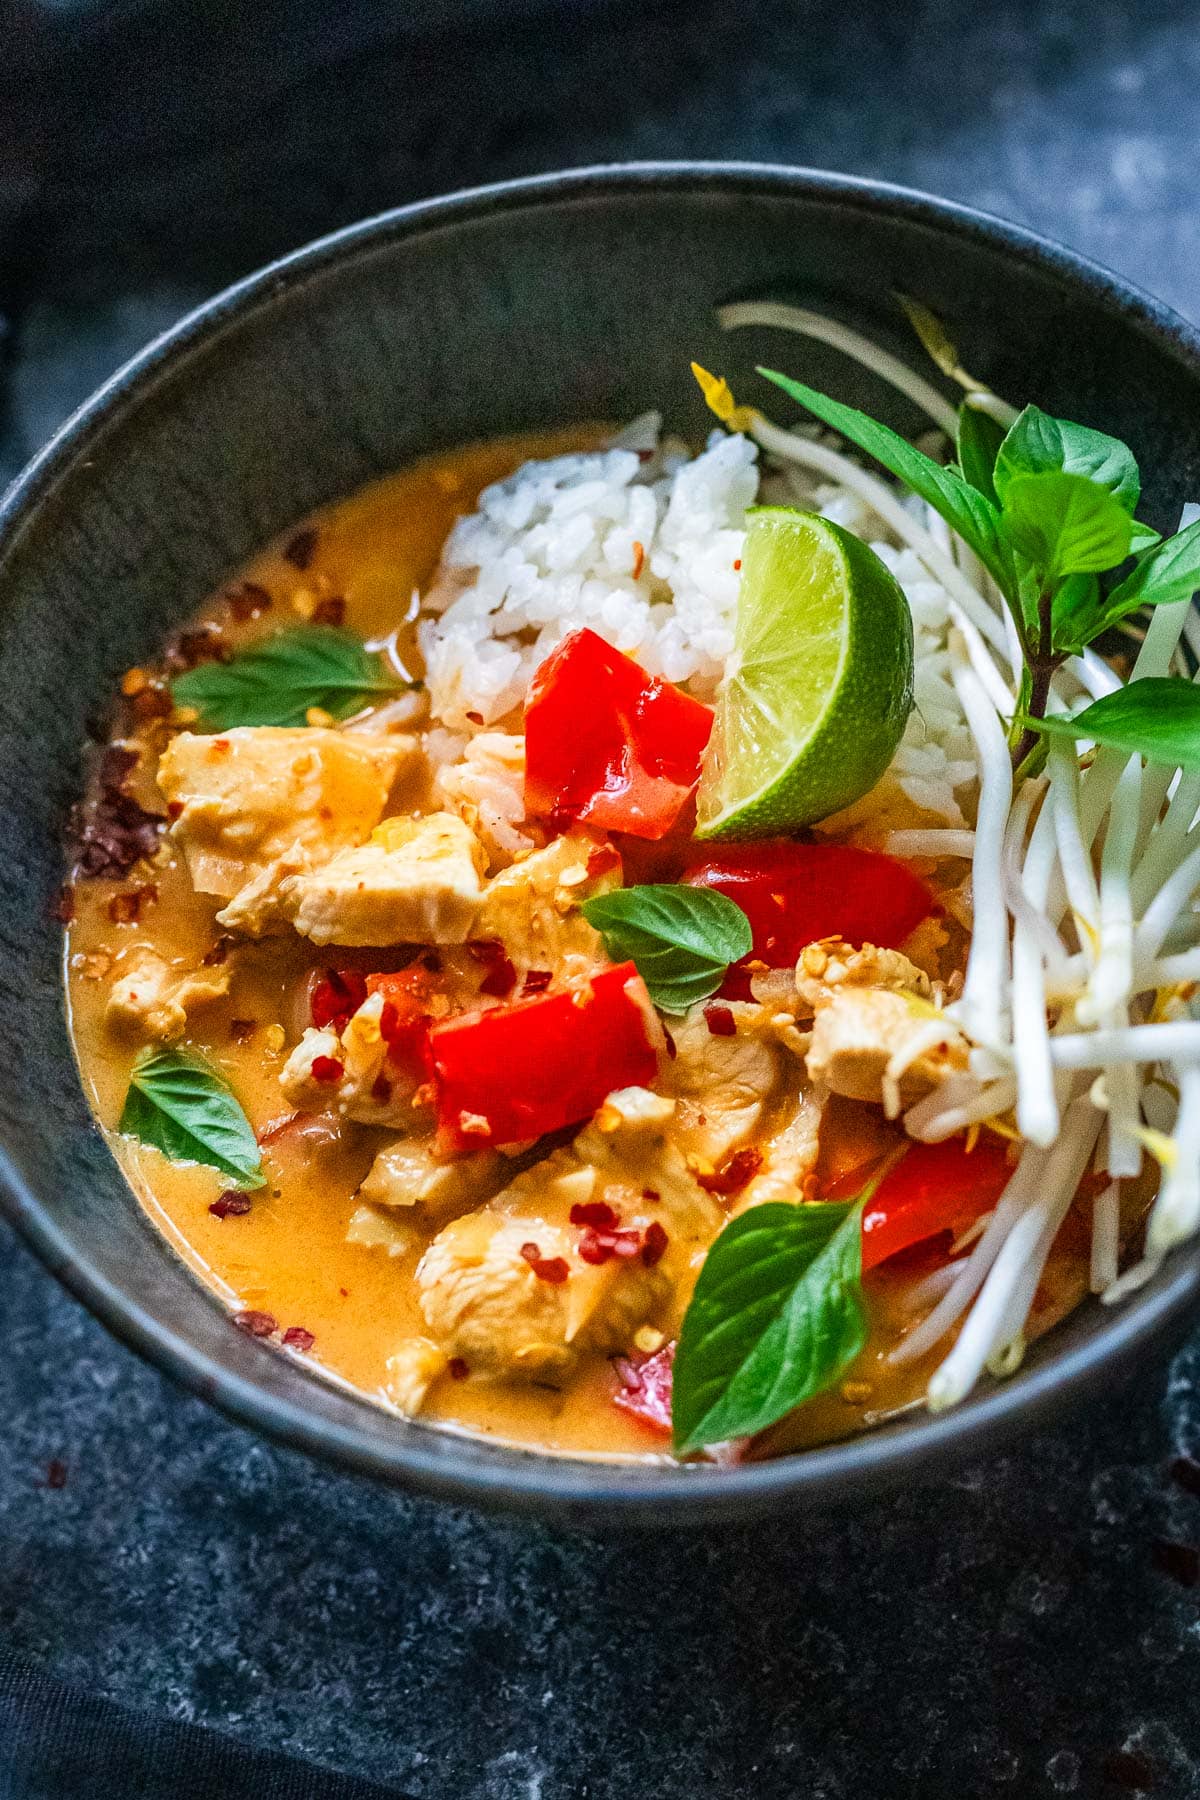  Thai red curry in a bowl.